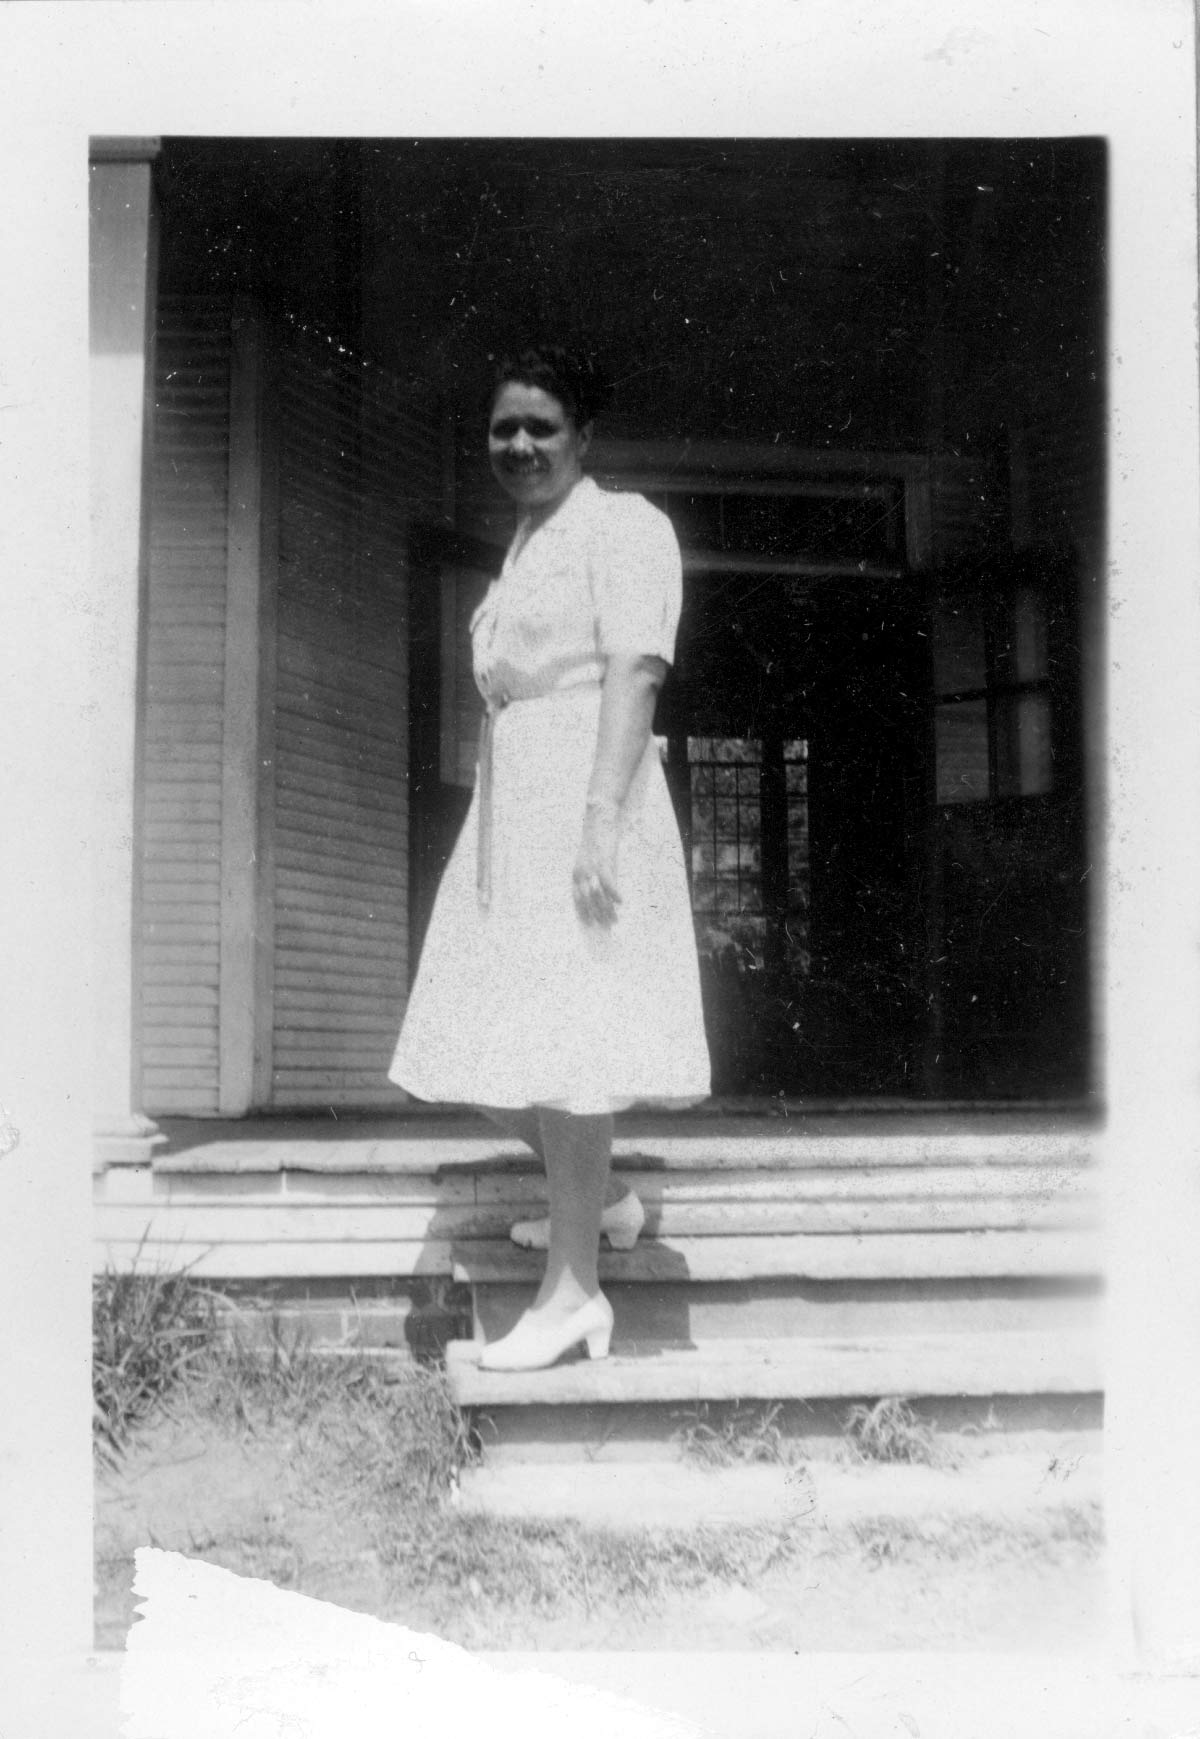 An old black and white photograph of a young black woman standing on the stairs of a front porch.